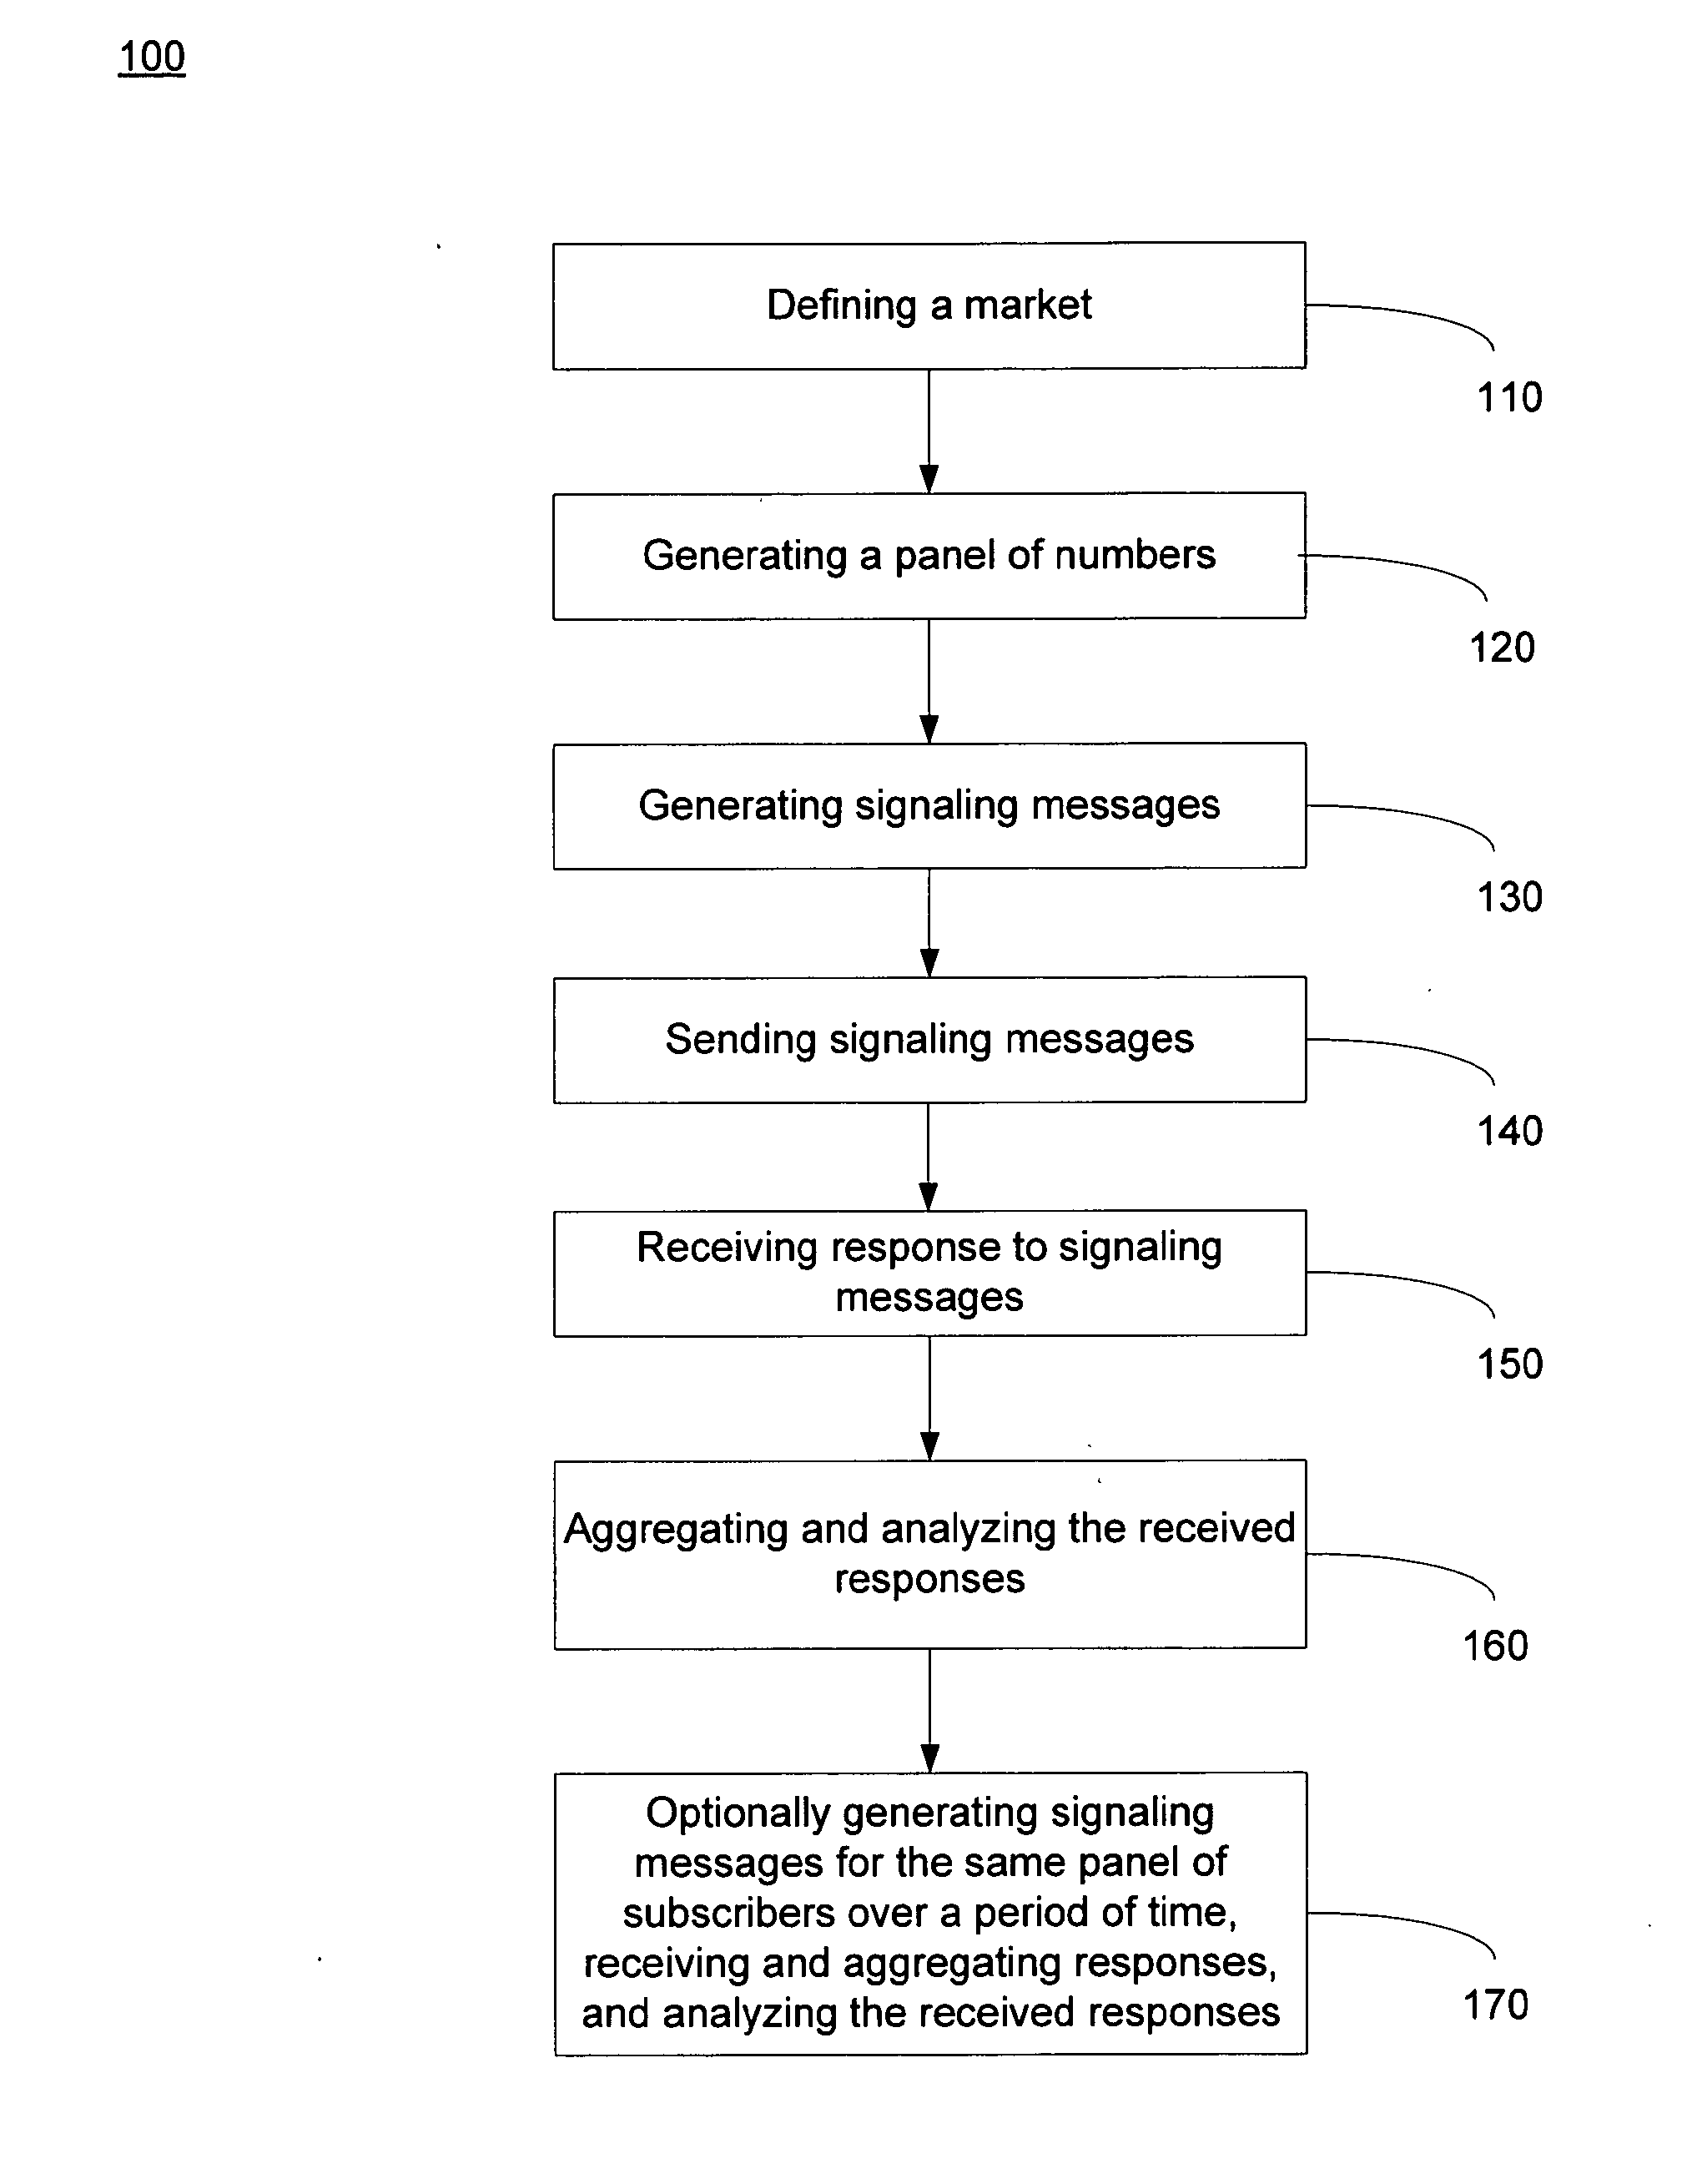 Method and system for measuring market-share for an entire telecommunication market